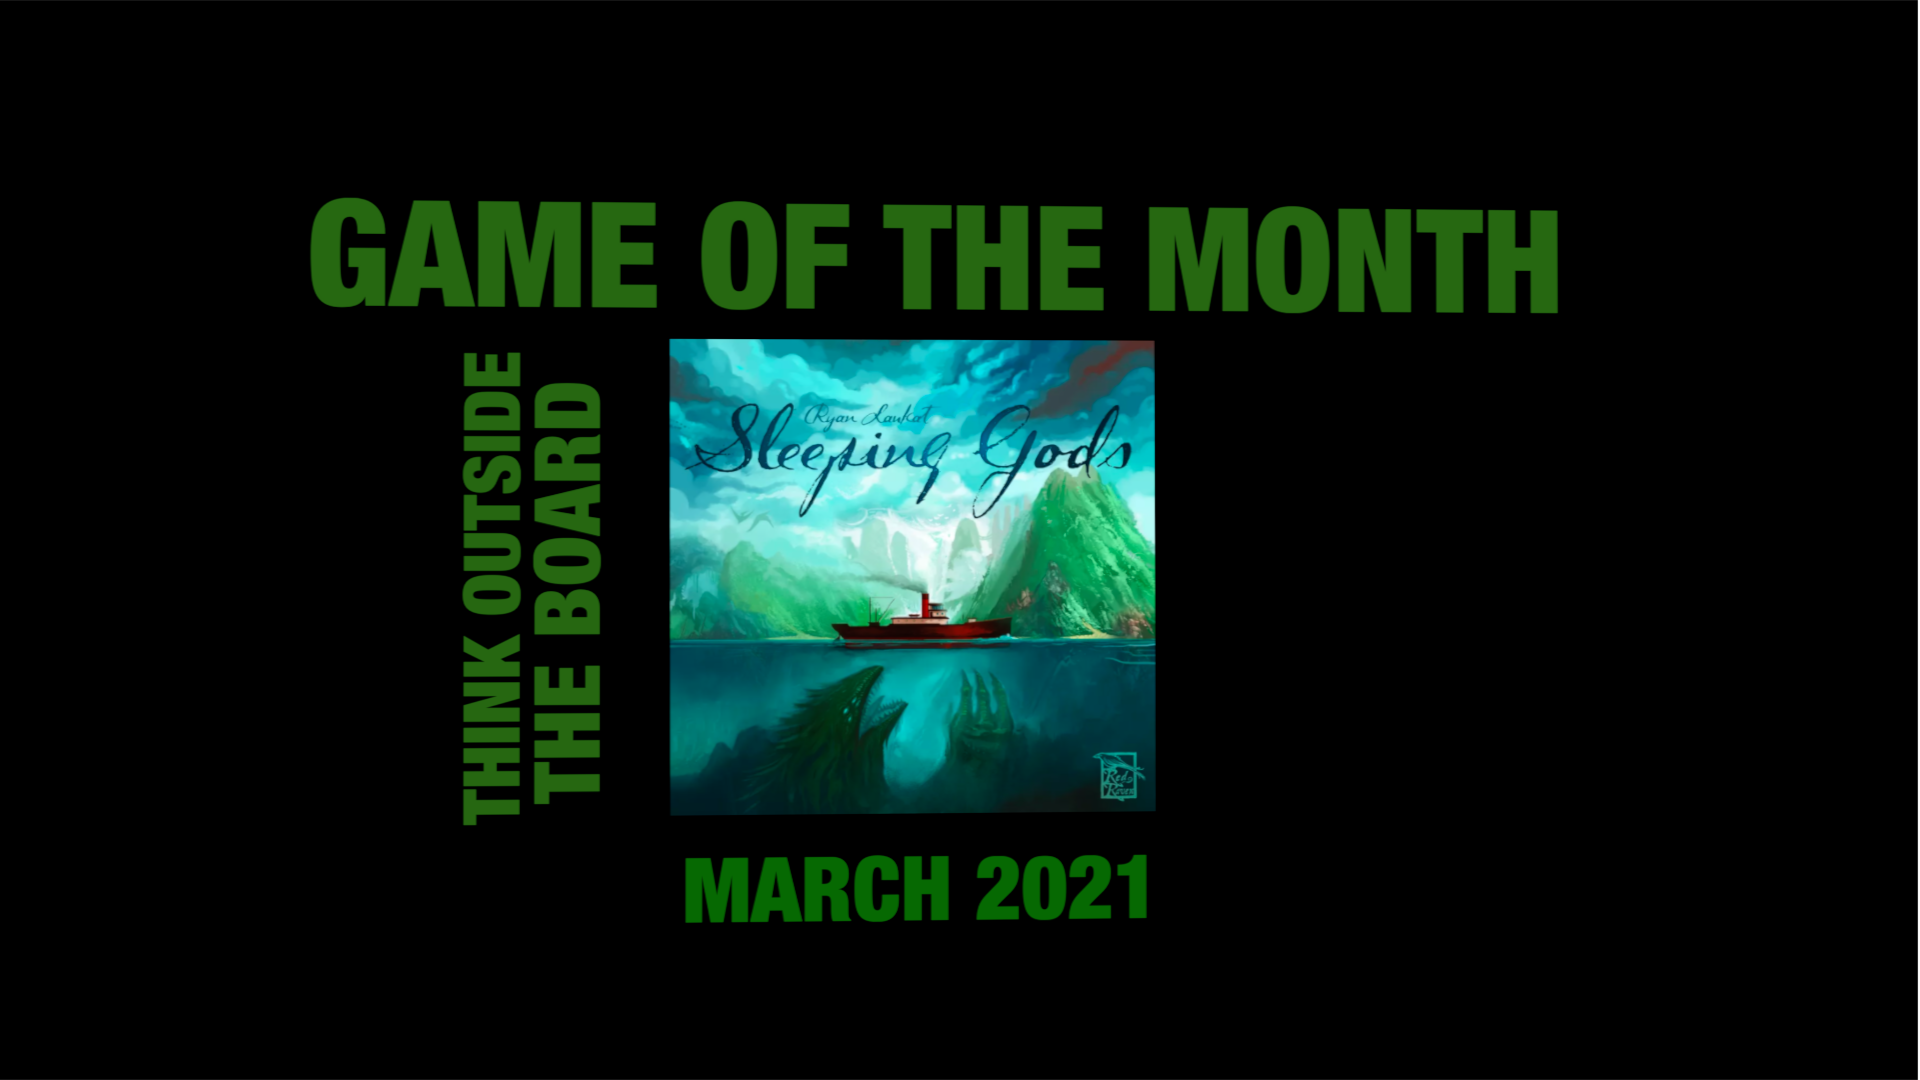 Game of the Month, March 2021